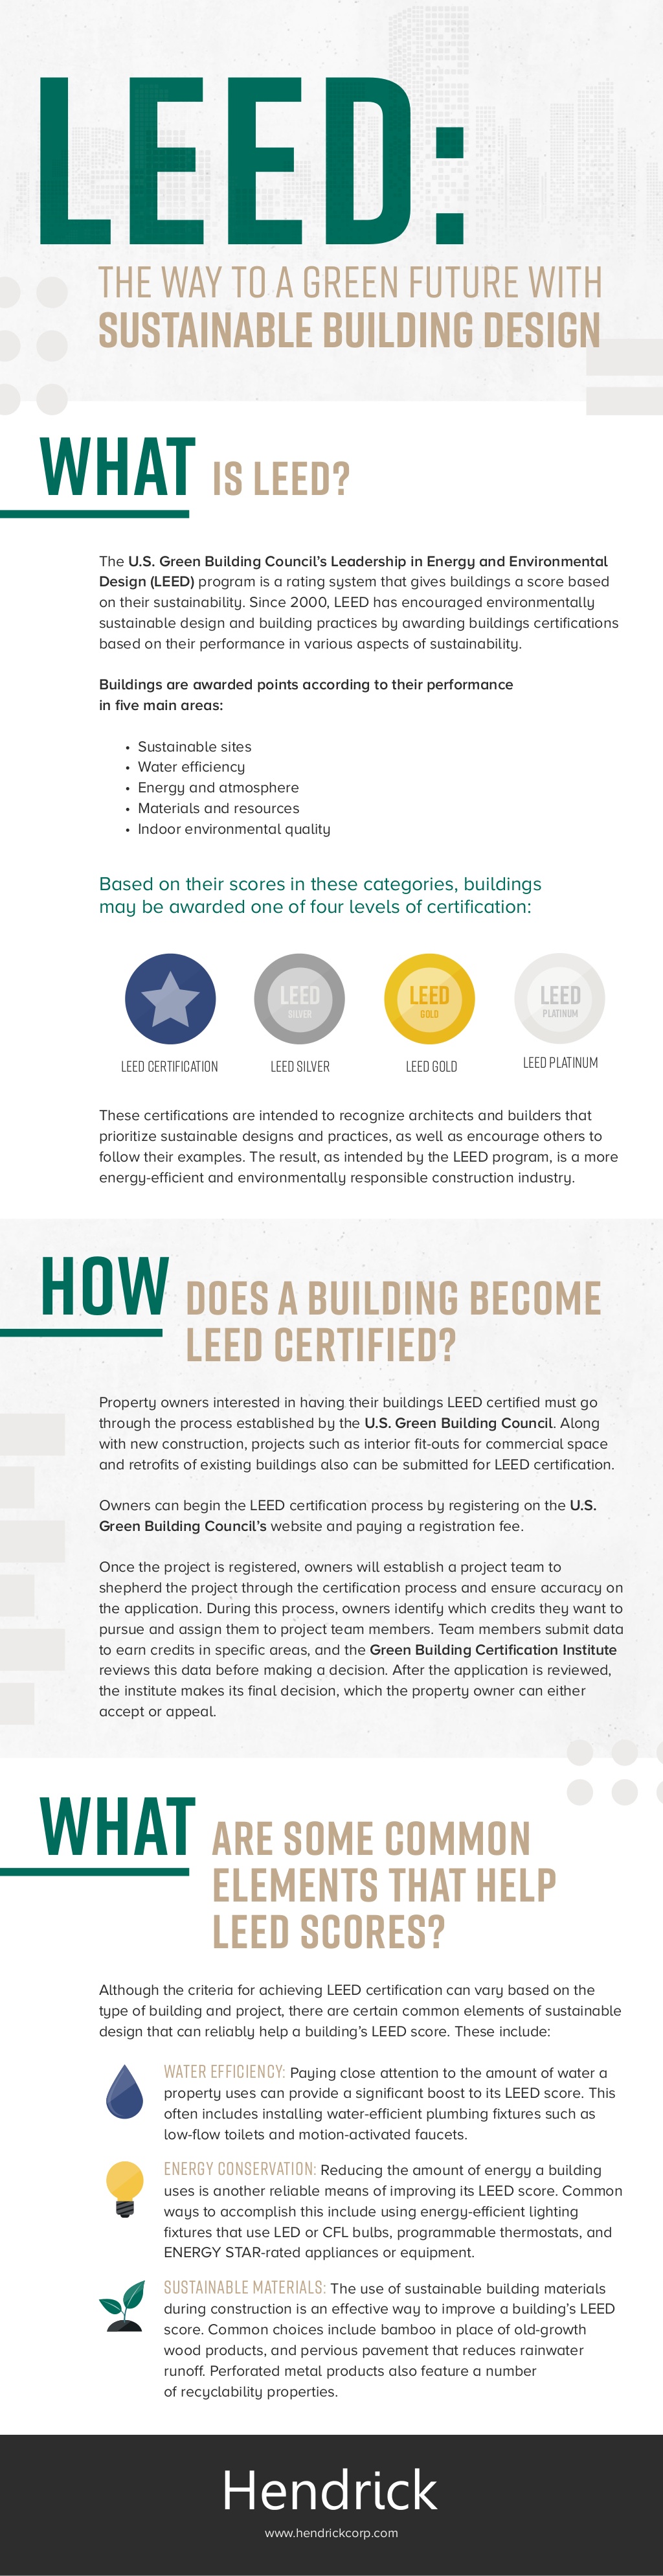 LEED and Sustainable Building Design